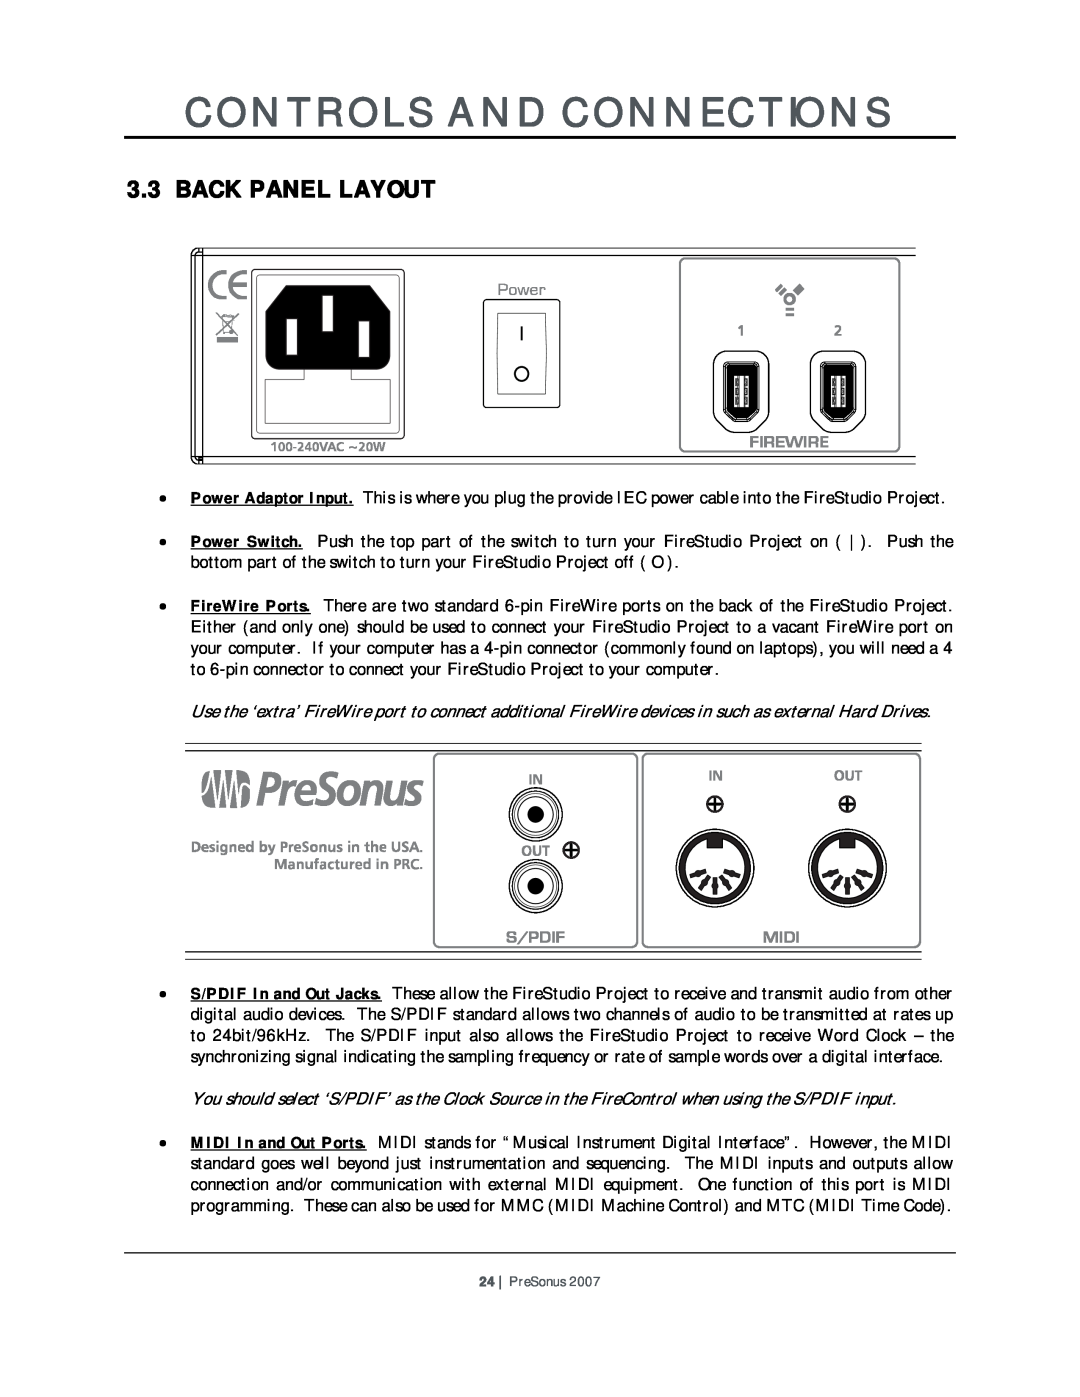 Presonus Audio electronic Microphone Preamplifier user manual Back Panel Layout, Controls And Connections, PreSonus 